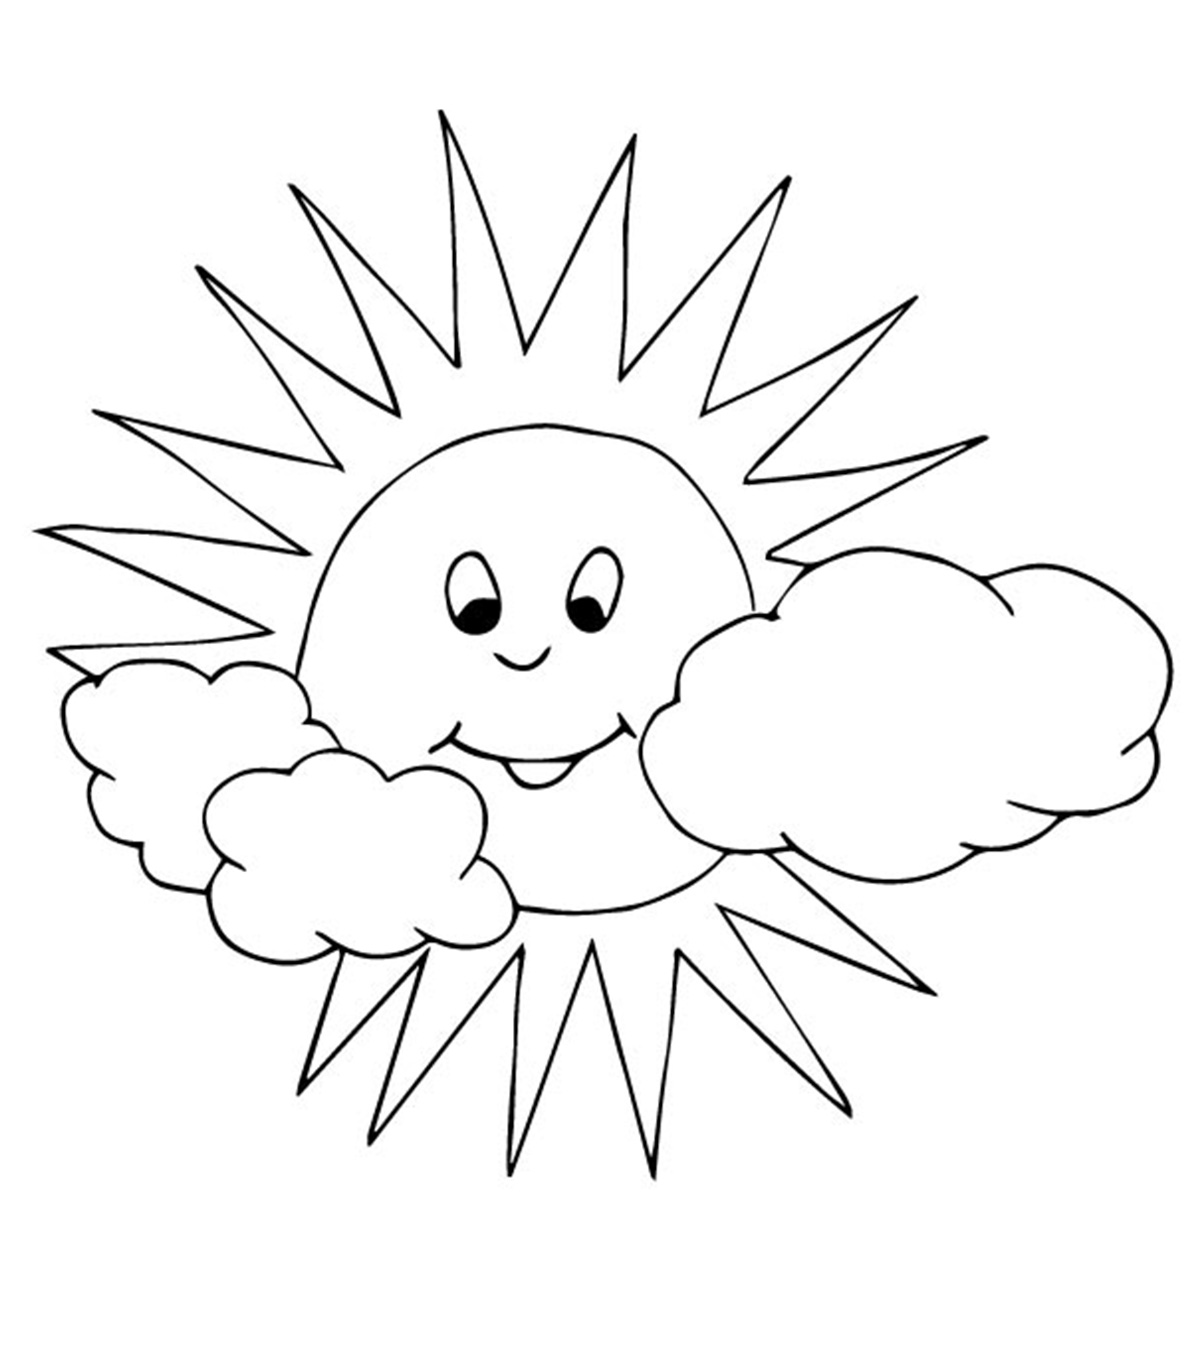 sun template coloring page